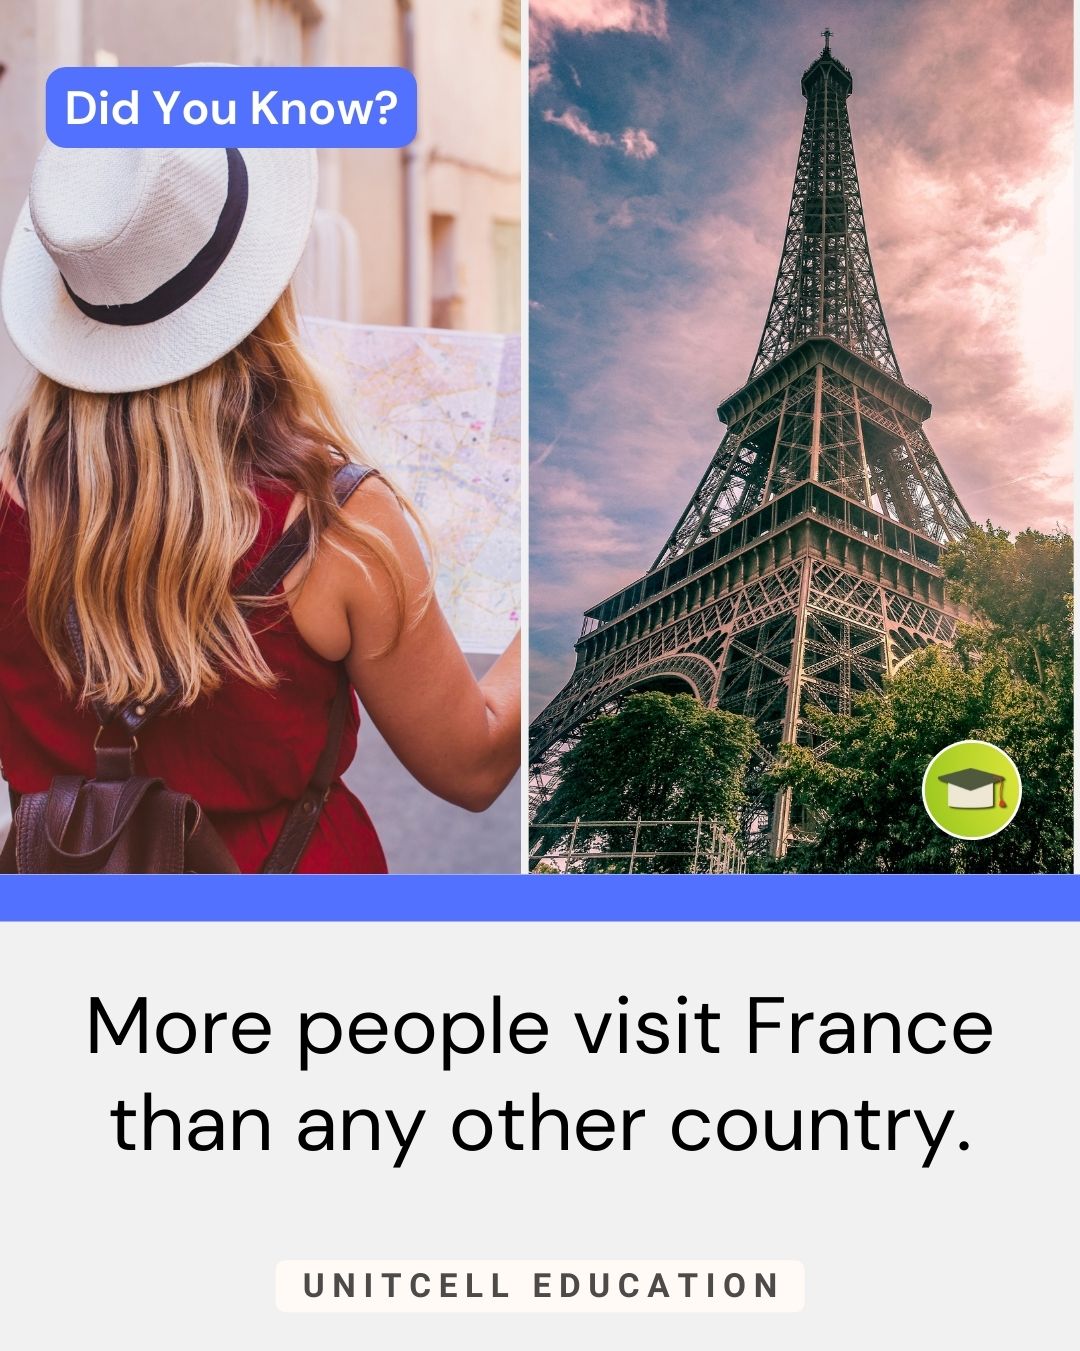 More people visit France than any other country.